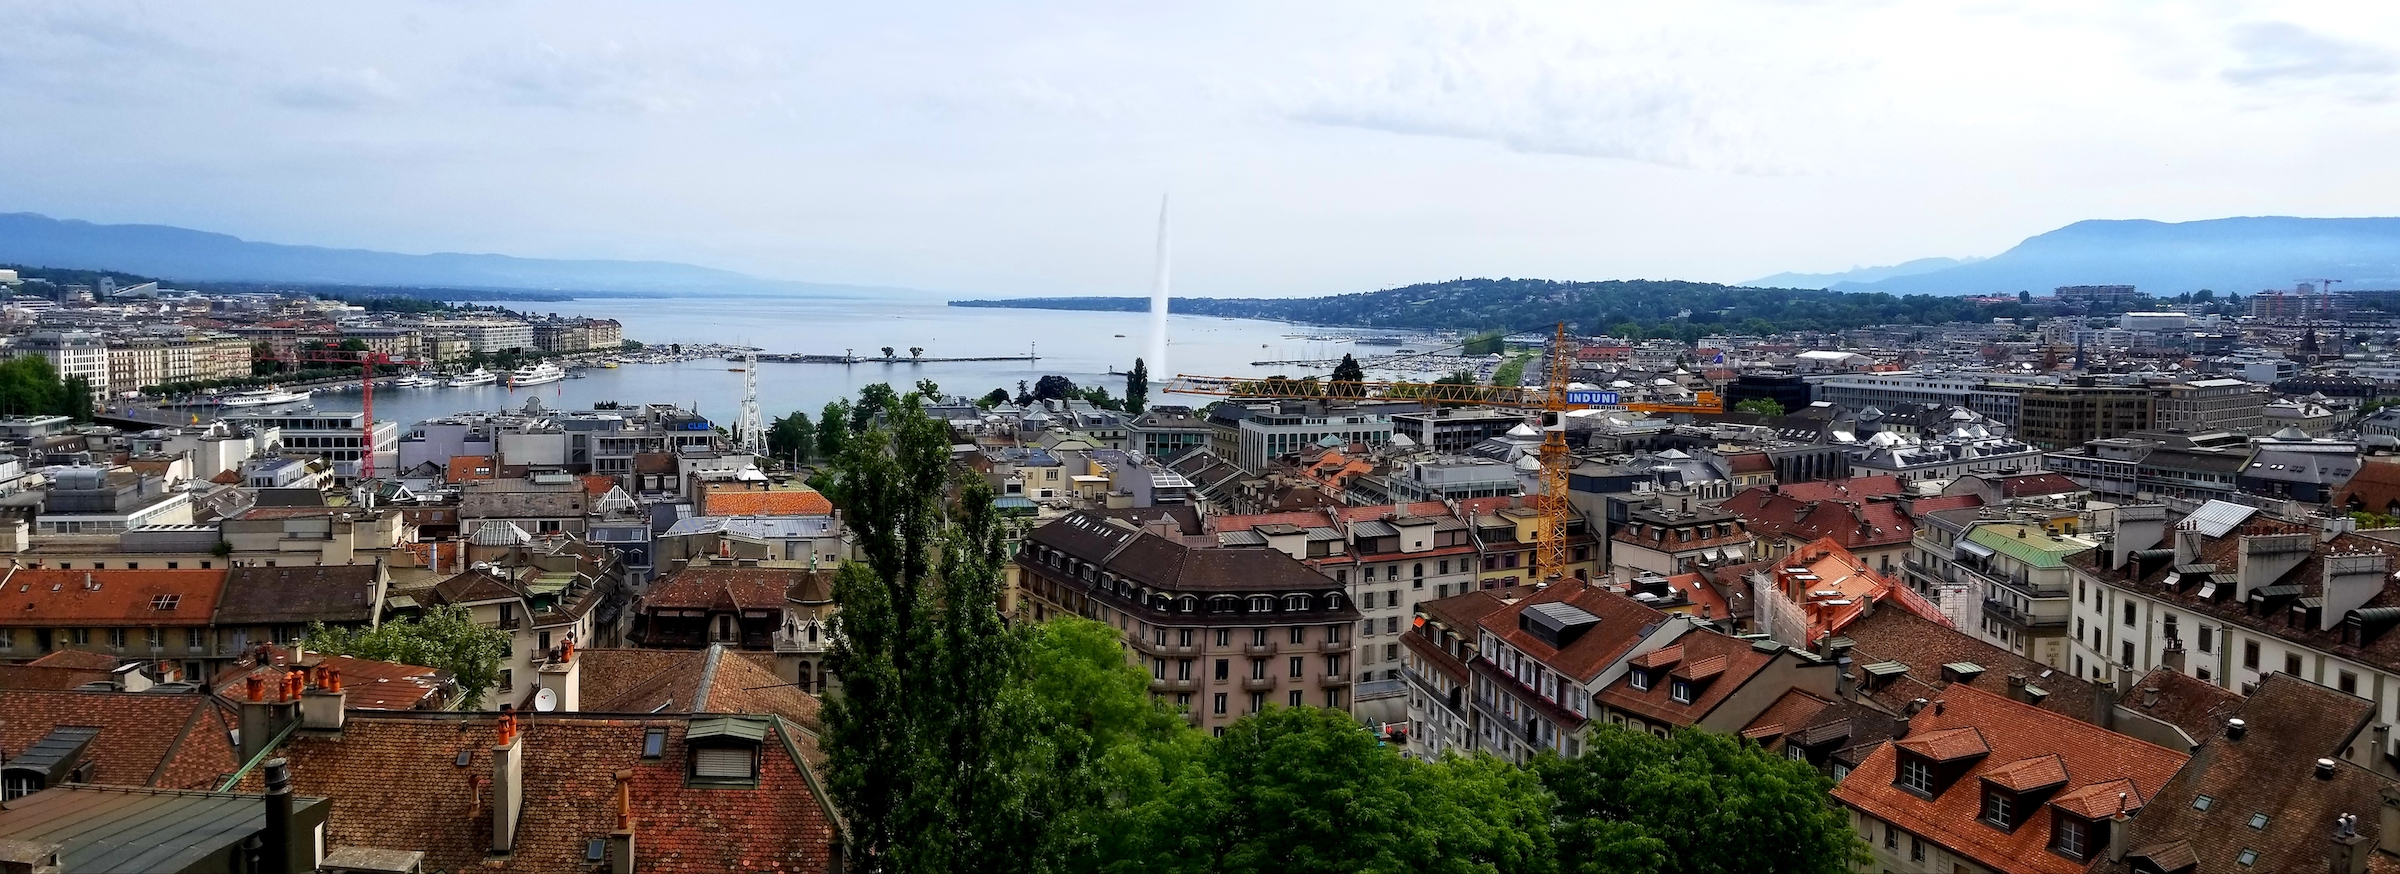 Panorama from St. Peter's Cathedral, Old Town Geneva